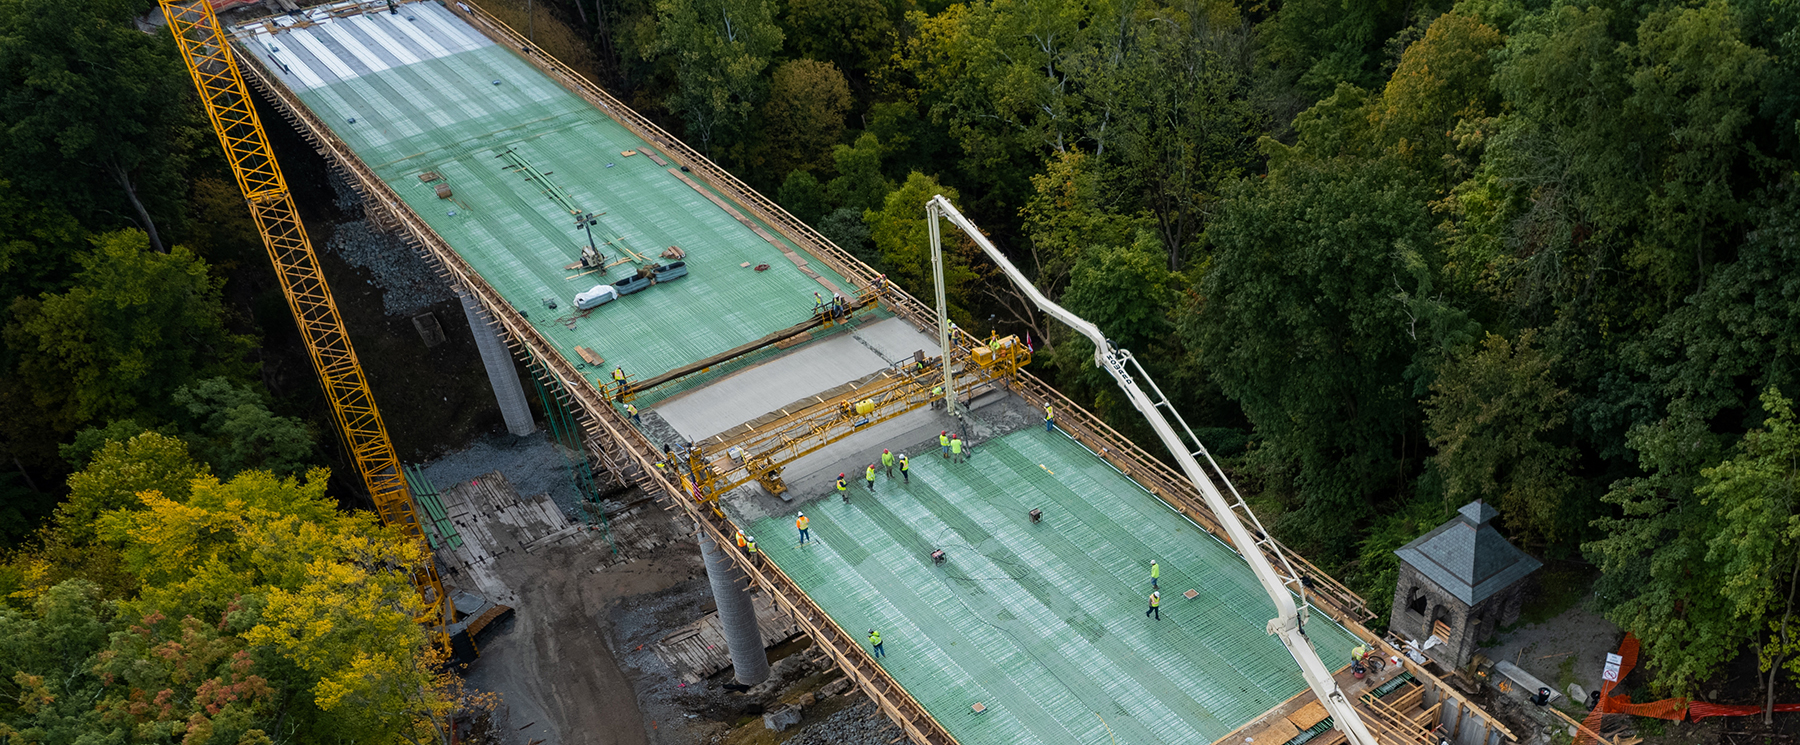 Concrete work began in late September 2022. (Image courtesy Swank Construction Co. LLC)